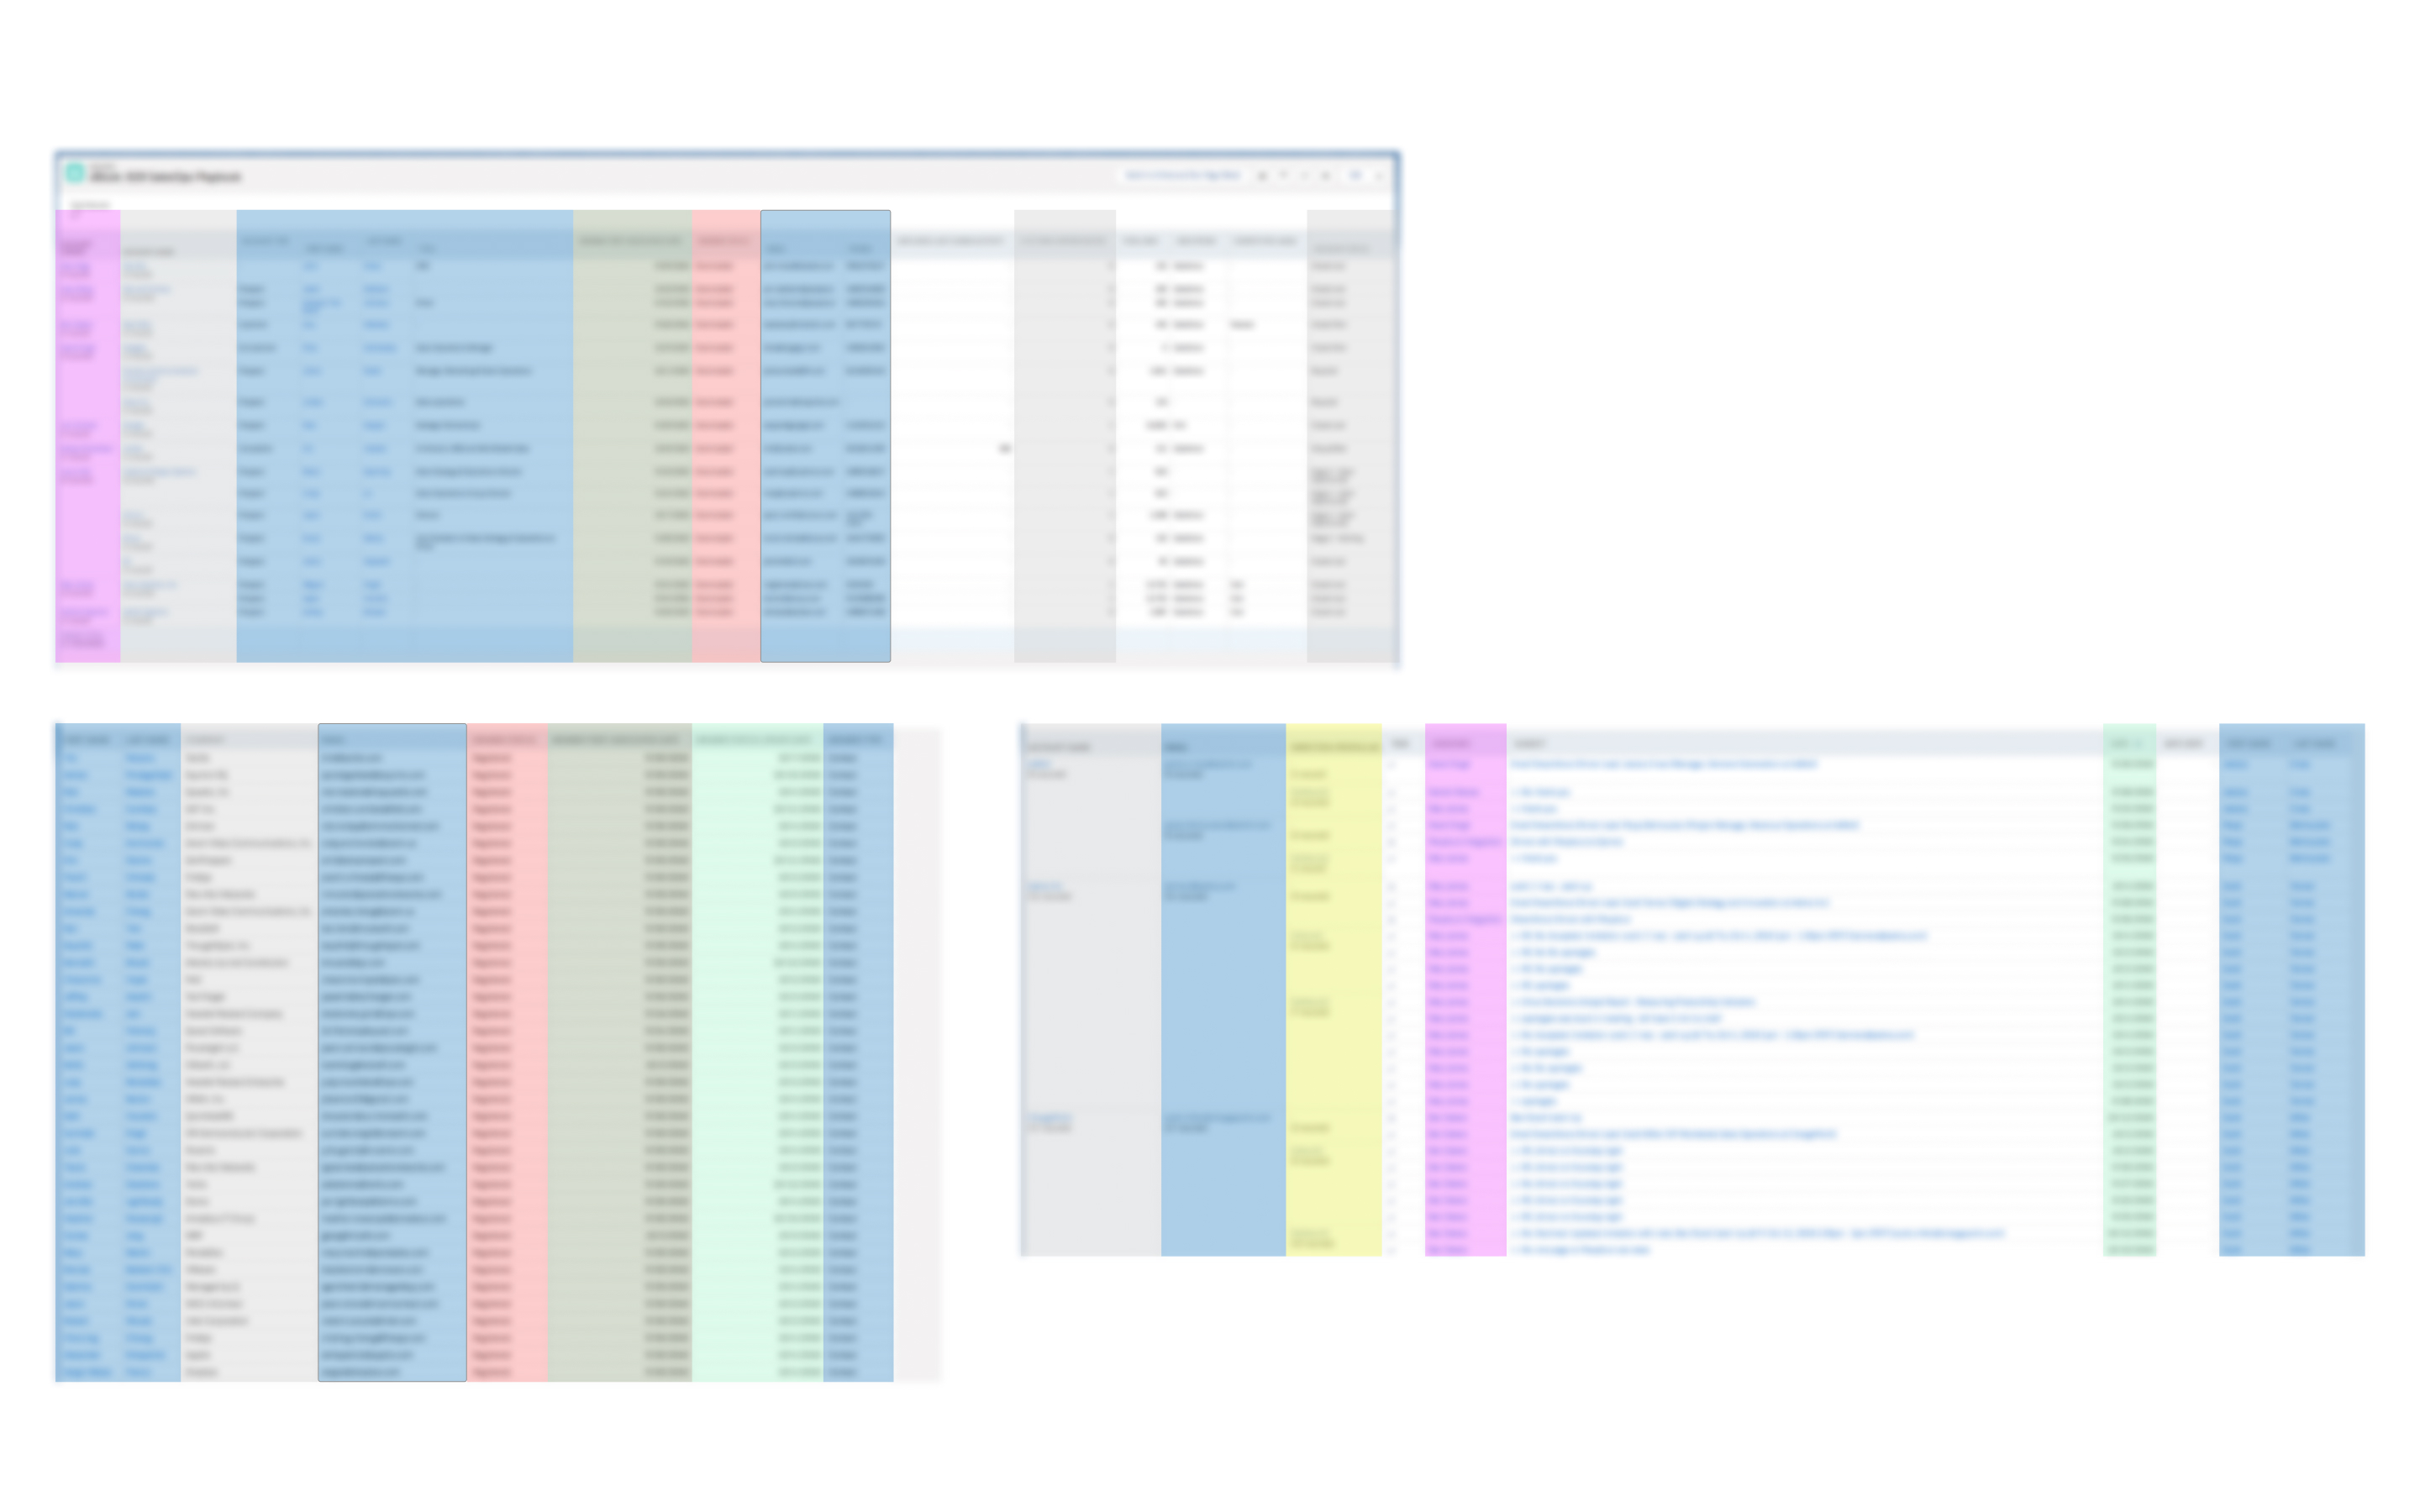 Salesforce reports from sales and marketing color-coded by data type